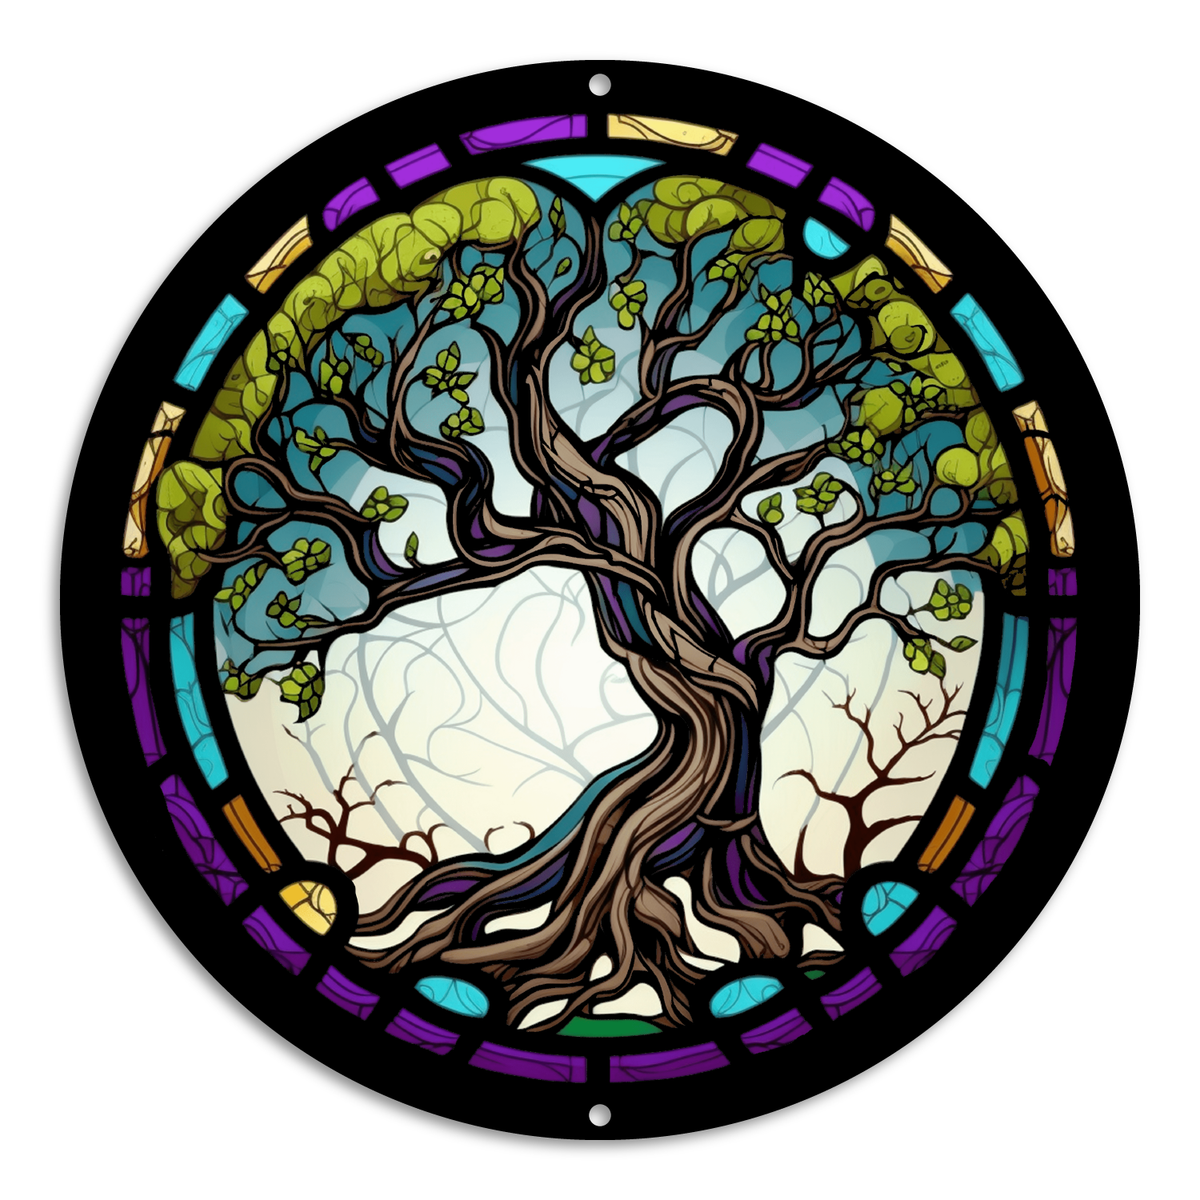 Tree of Life Stained Glass Pattern PDF, Jpg, Svg, Png, and Psd